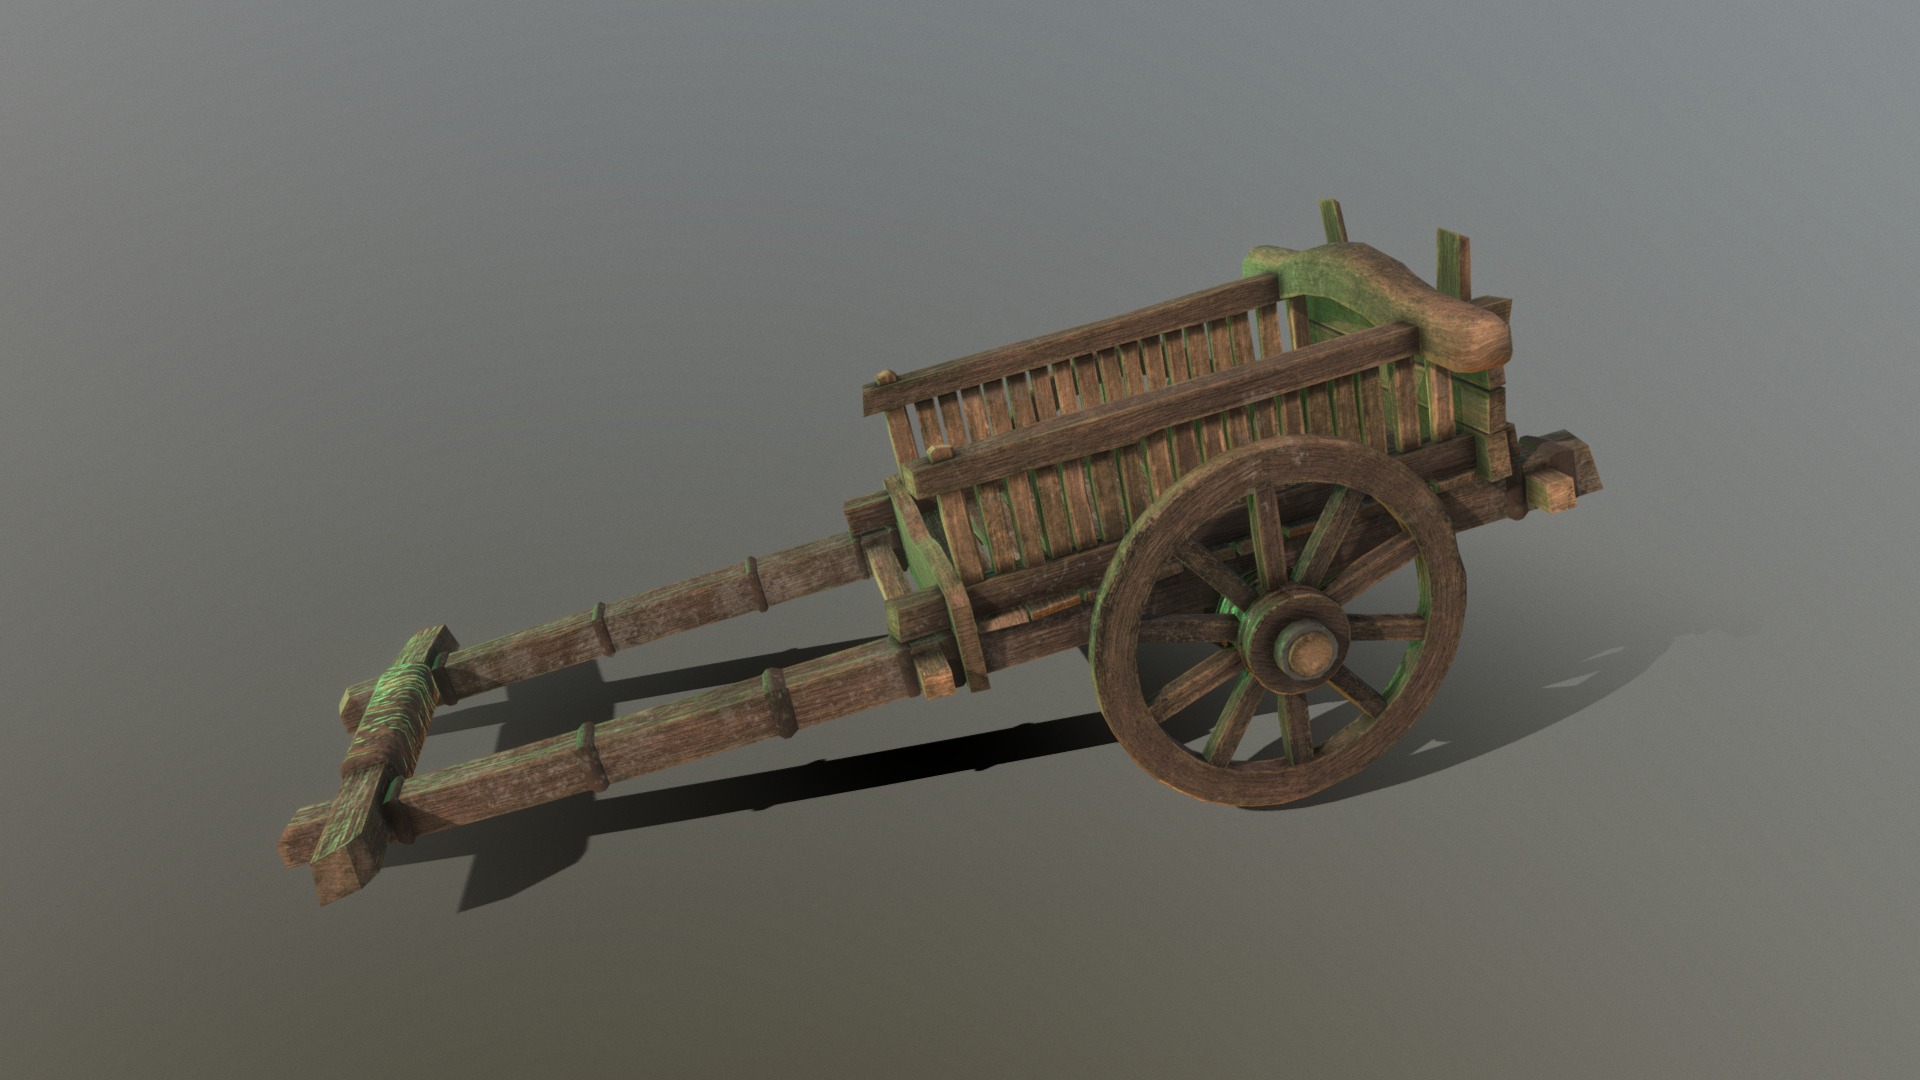 3D model HIE Cart D180403 - This is a 3D model of the HIE Cart D180403. The 3D model is about a wooden toy vehicle.